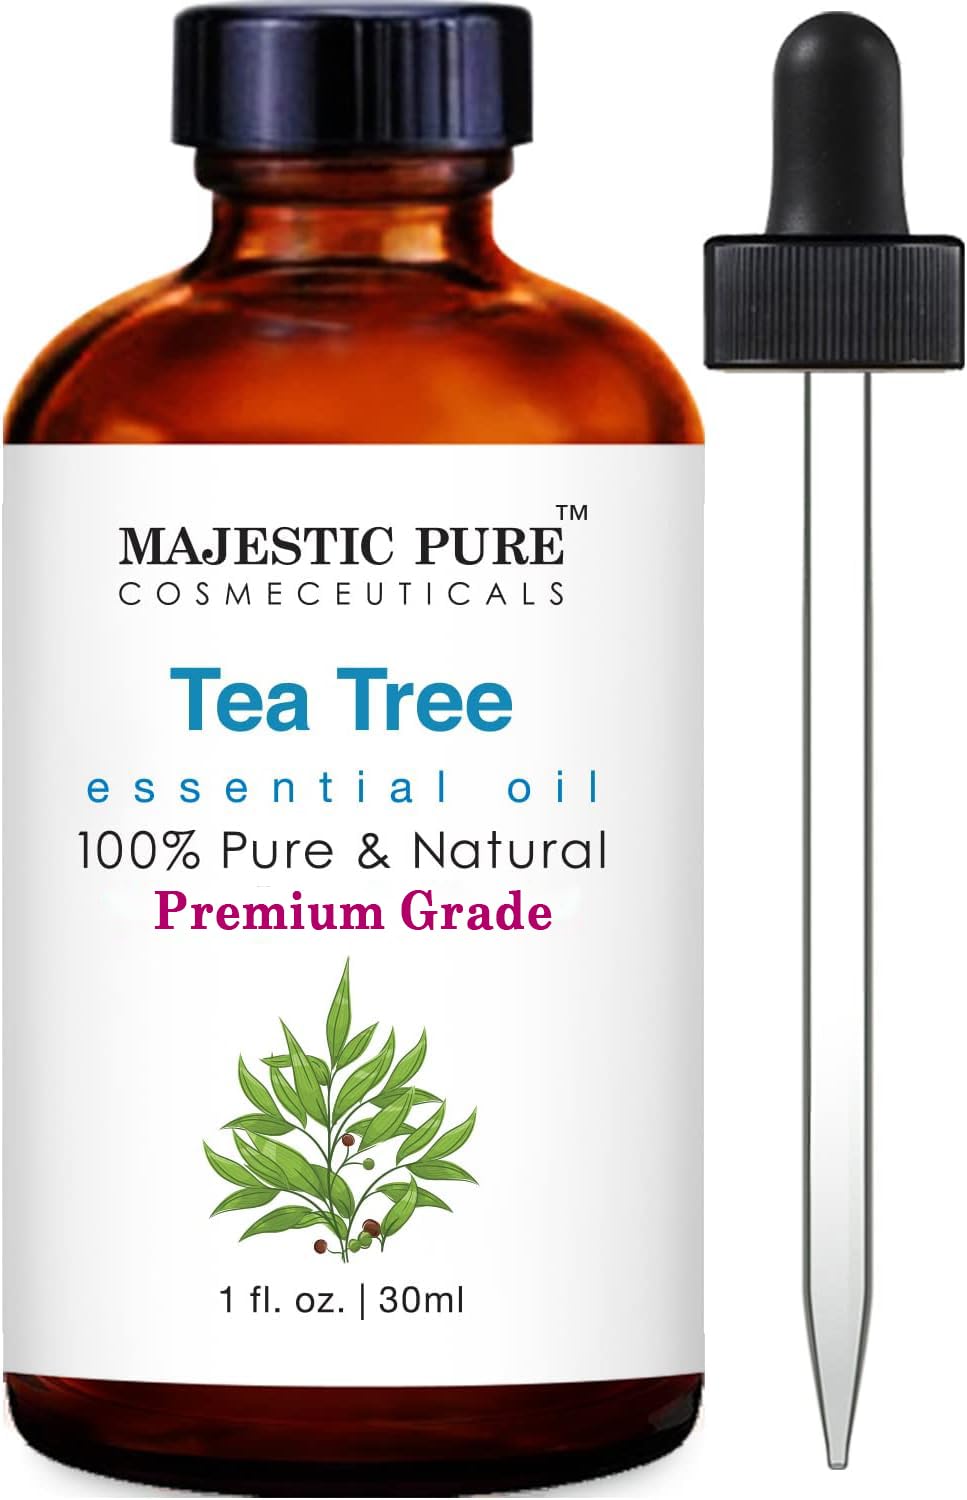 Majestic Pure Tea Tree Essential Oil - Pure, Natural and Premium Grade - Tea Tree Oil for Skin, Face, Hair, Nails, Acne, Scalp, Massage, Aromatherapy, Diffuser, Topical & Household Uses - 1 fl oz